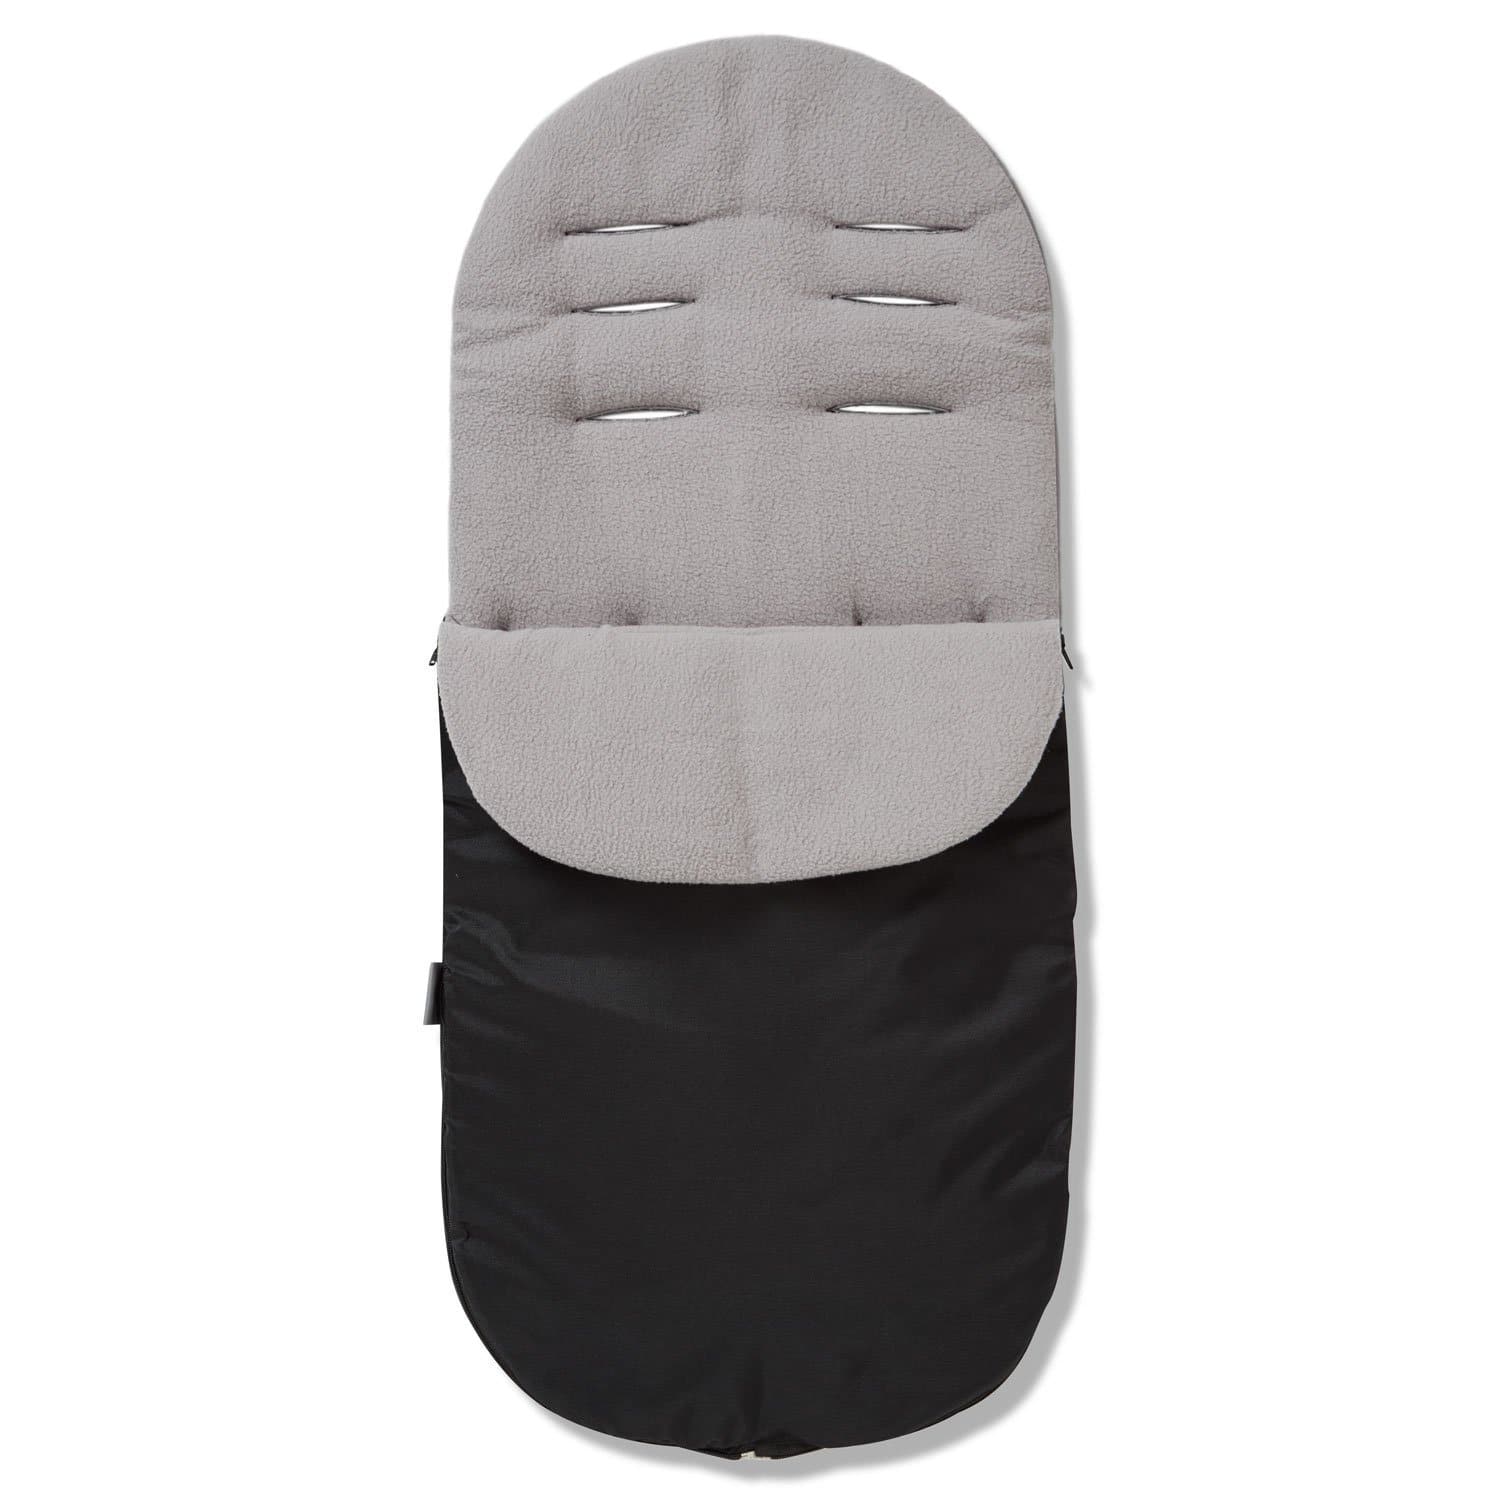 Footmuff / Cosy Toes Compatible with Kiddicare.com - Grey / Fits All Models | For Your Little One